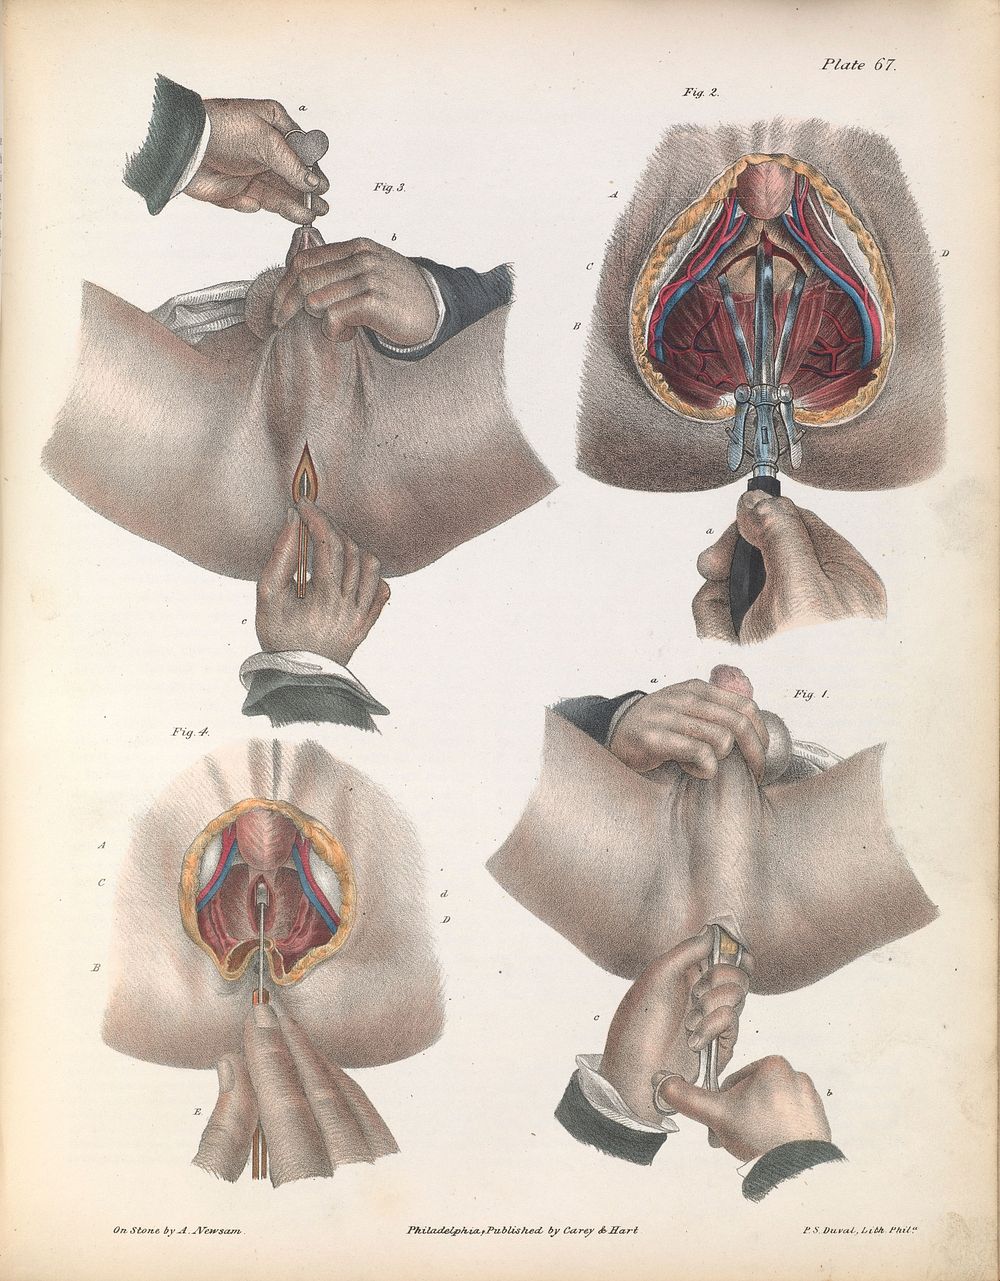 Plate LXVII. Surgical technique for lithotomy.